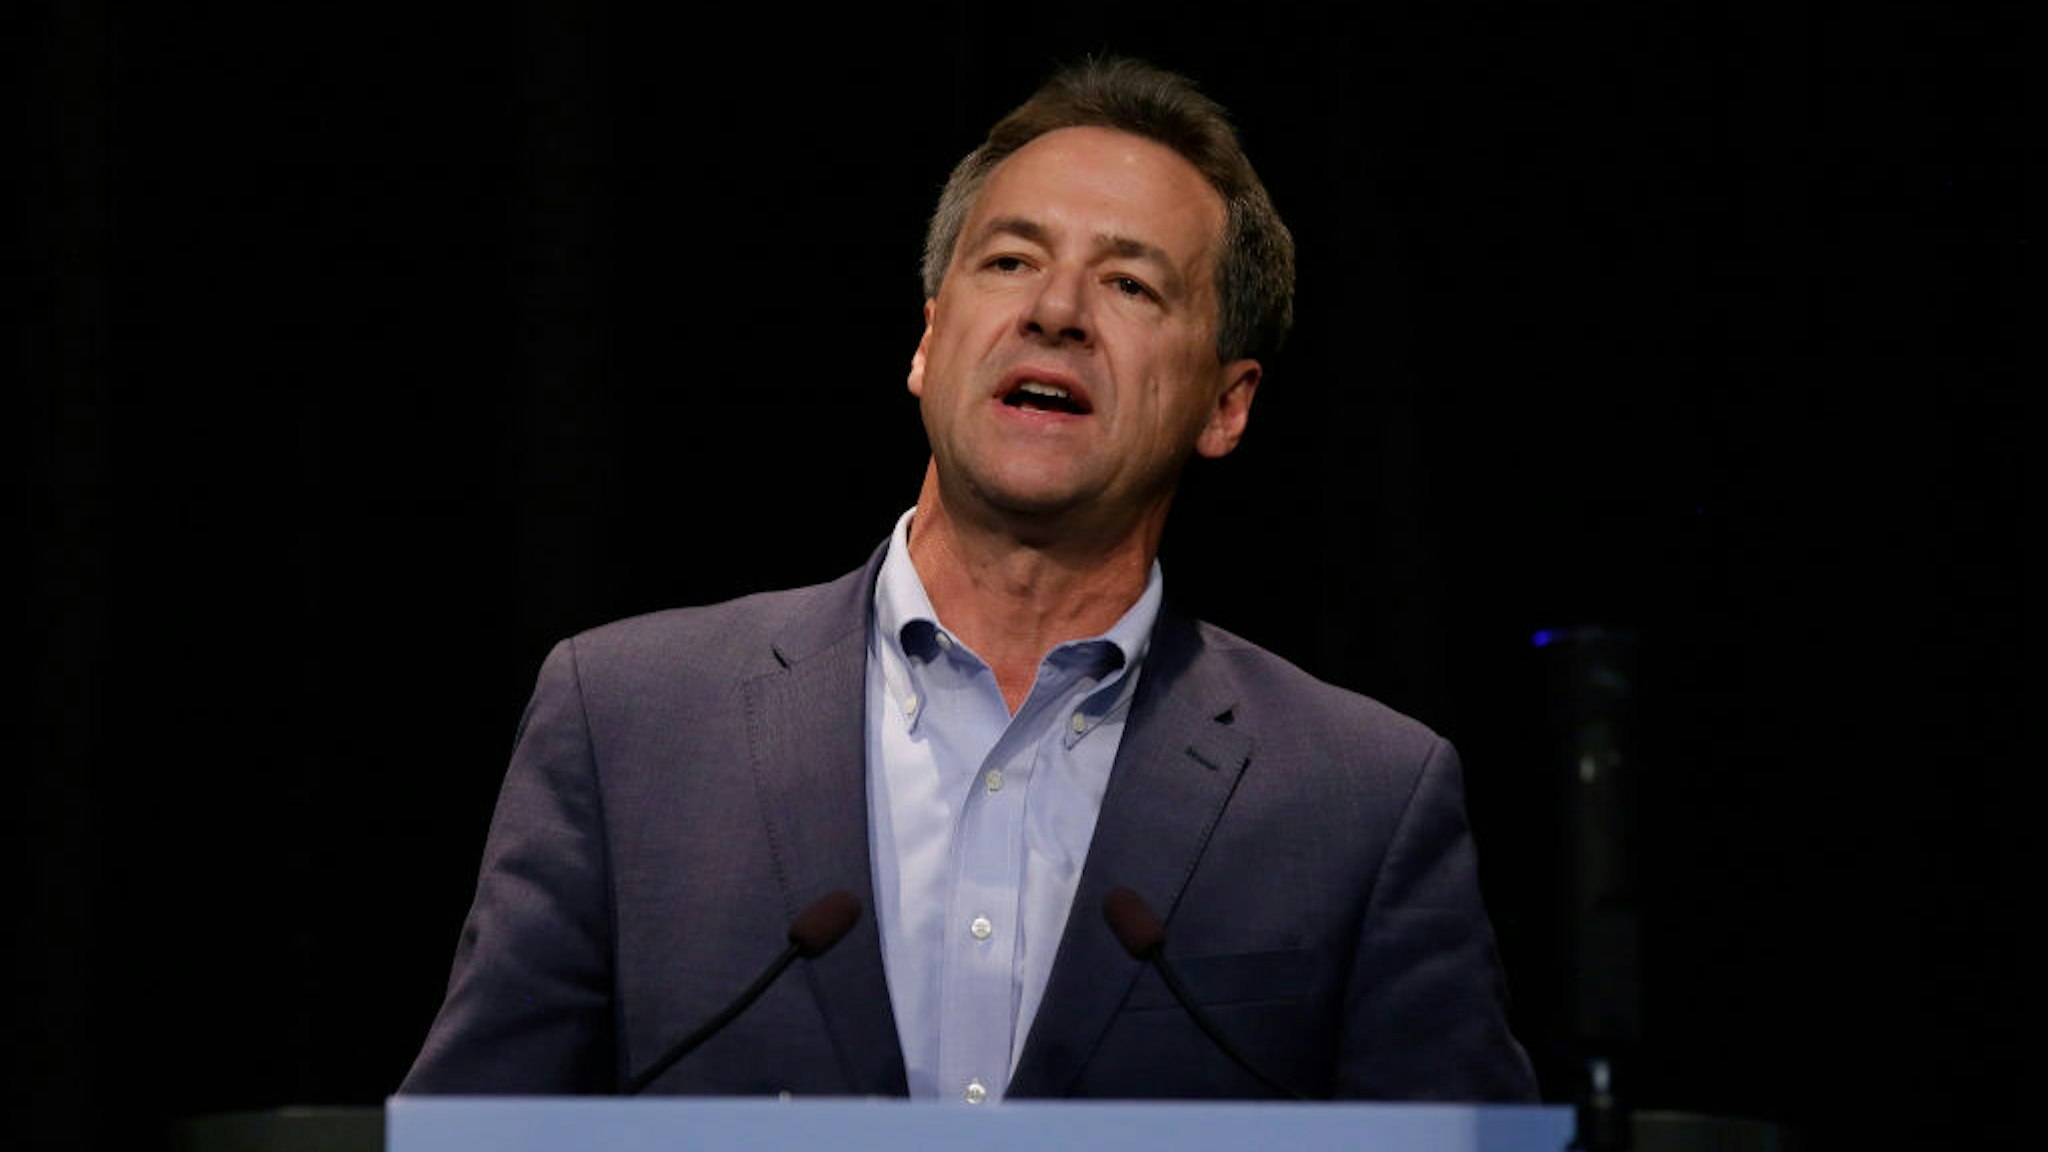 Steve Bullock speaks at the Iowa Federation Labor Convention on August 21, 2019 in Altoona, Iowa